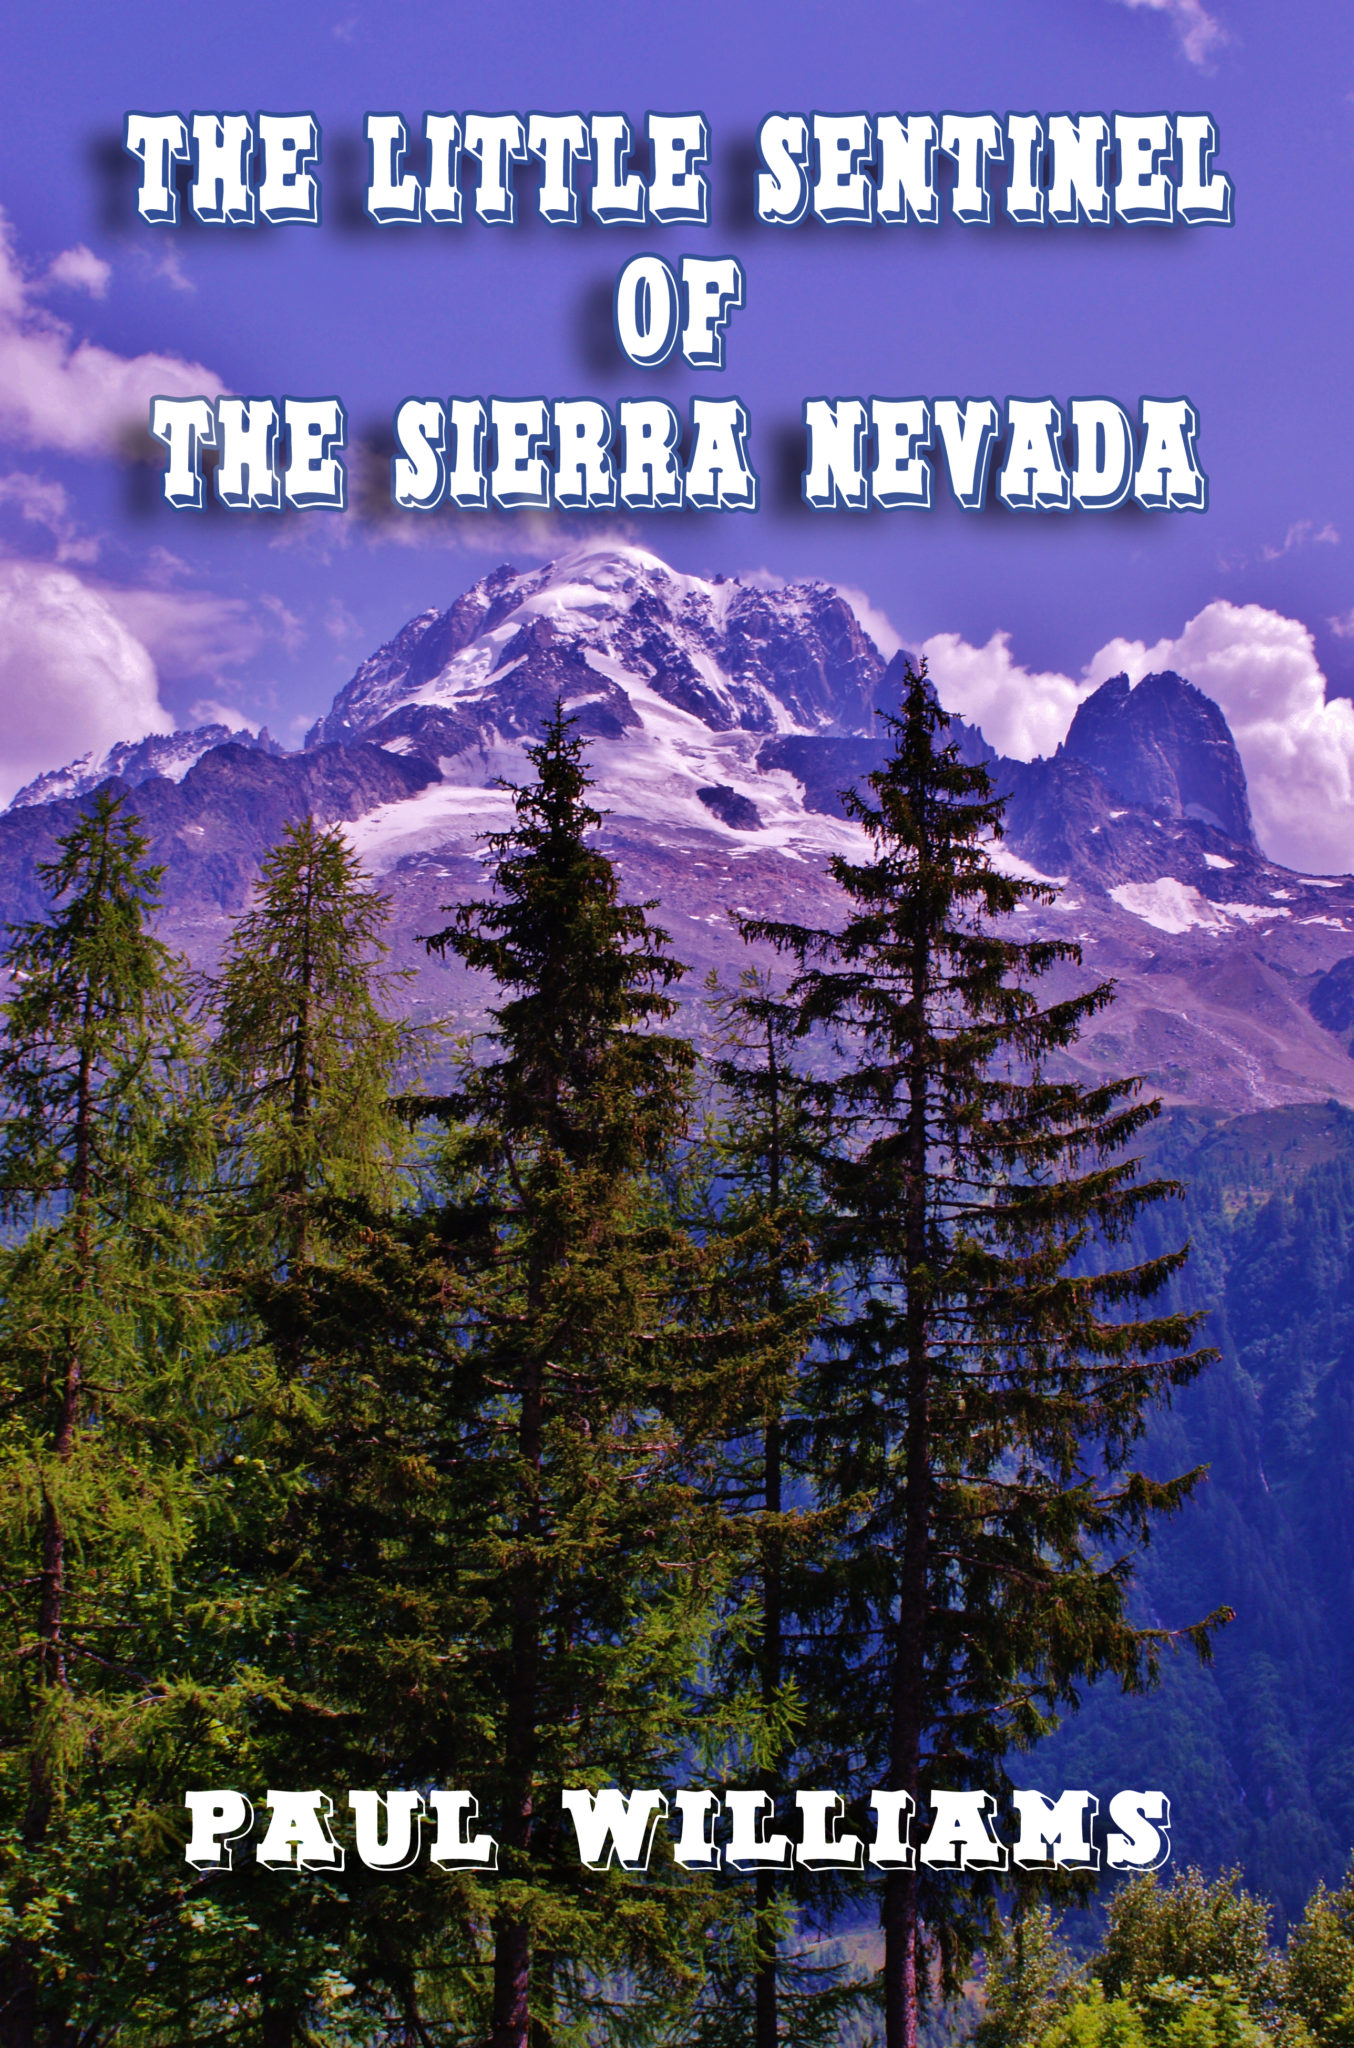 FREE: The Little Sentinel of the Sierra Nevada by Paul Williams